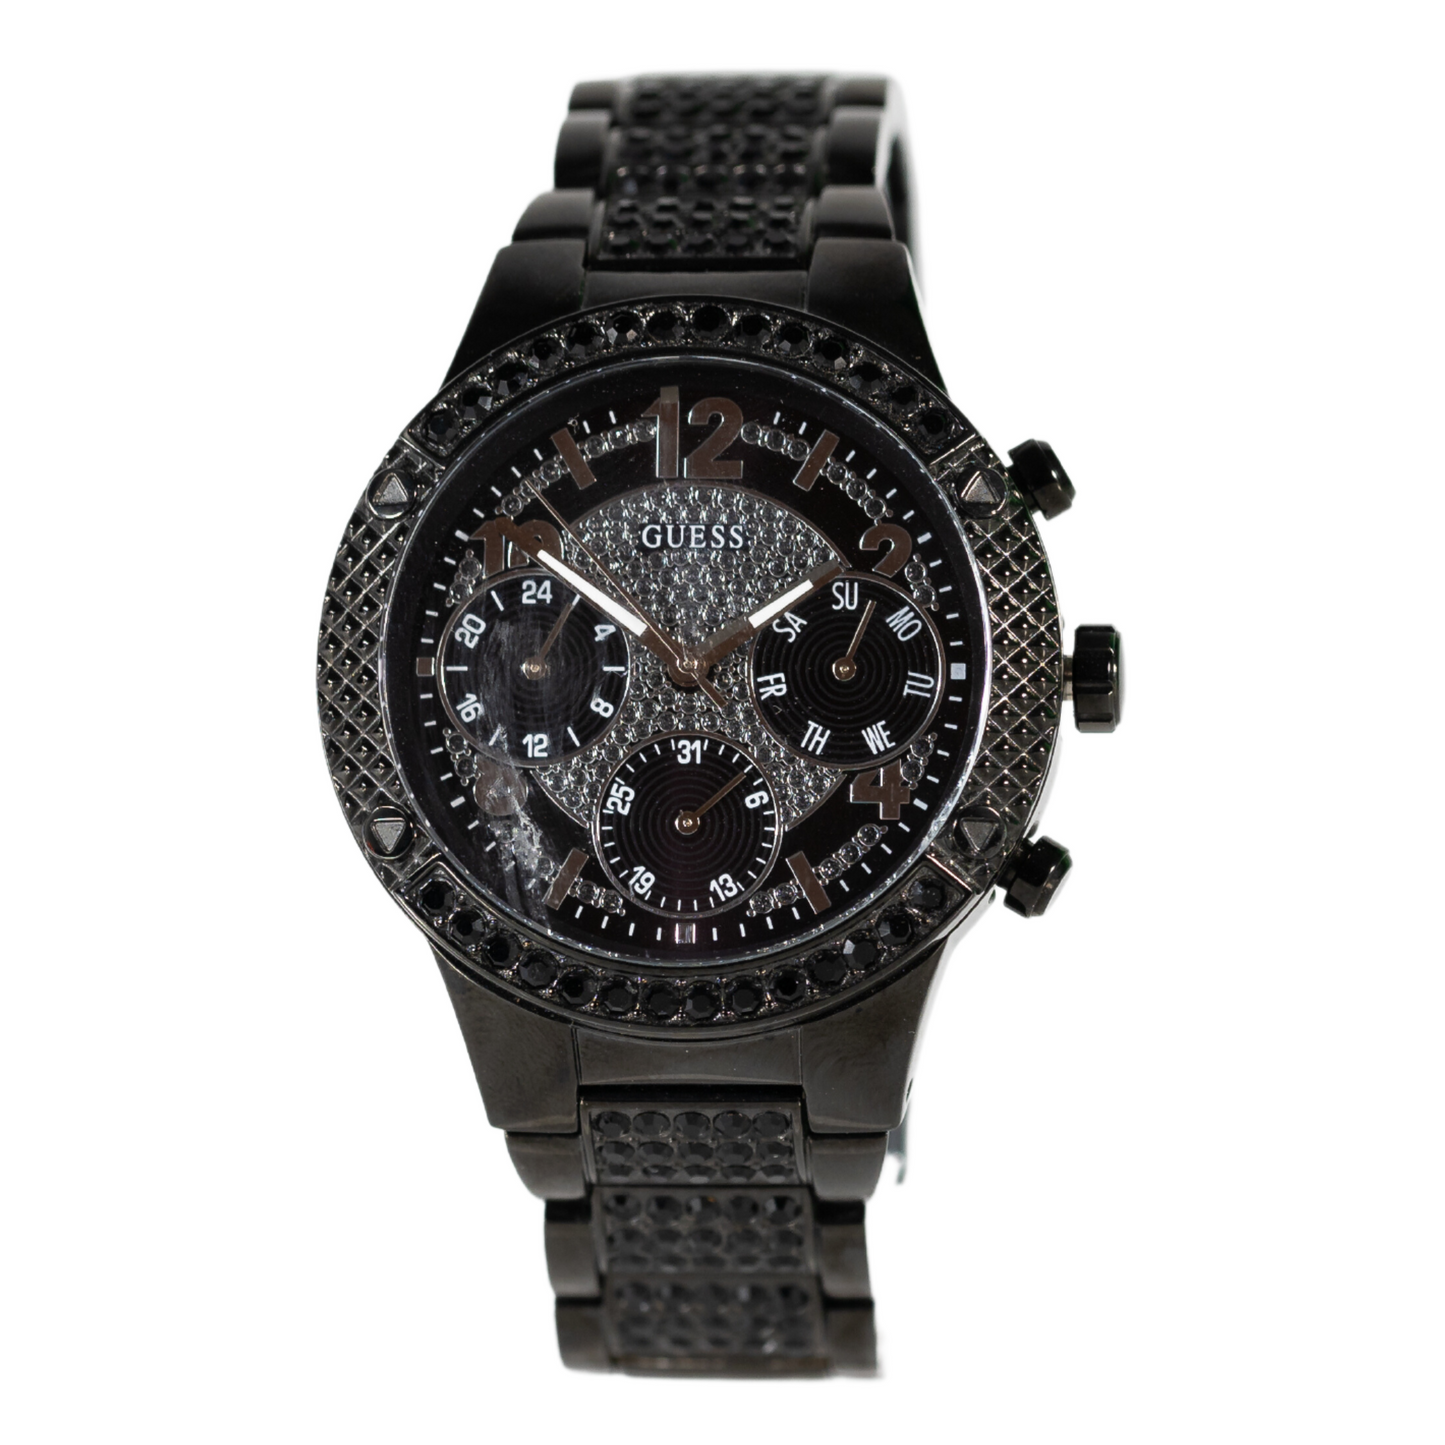 GUESS Men's Stainless Steel Crystal Watch Black Stainless Steel Band Black Dial Crystal Accents on Bezel